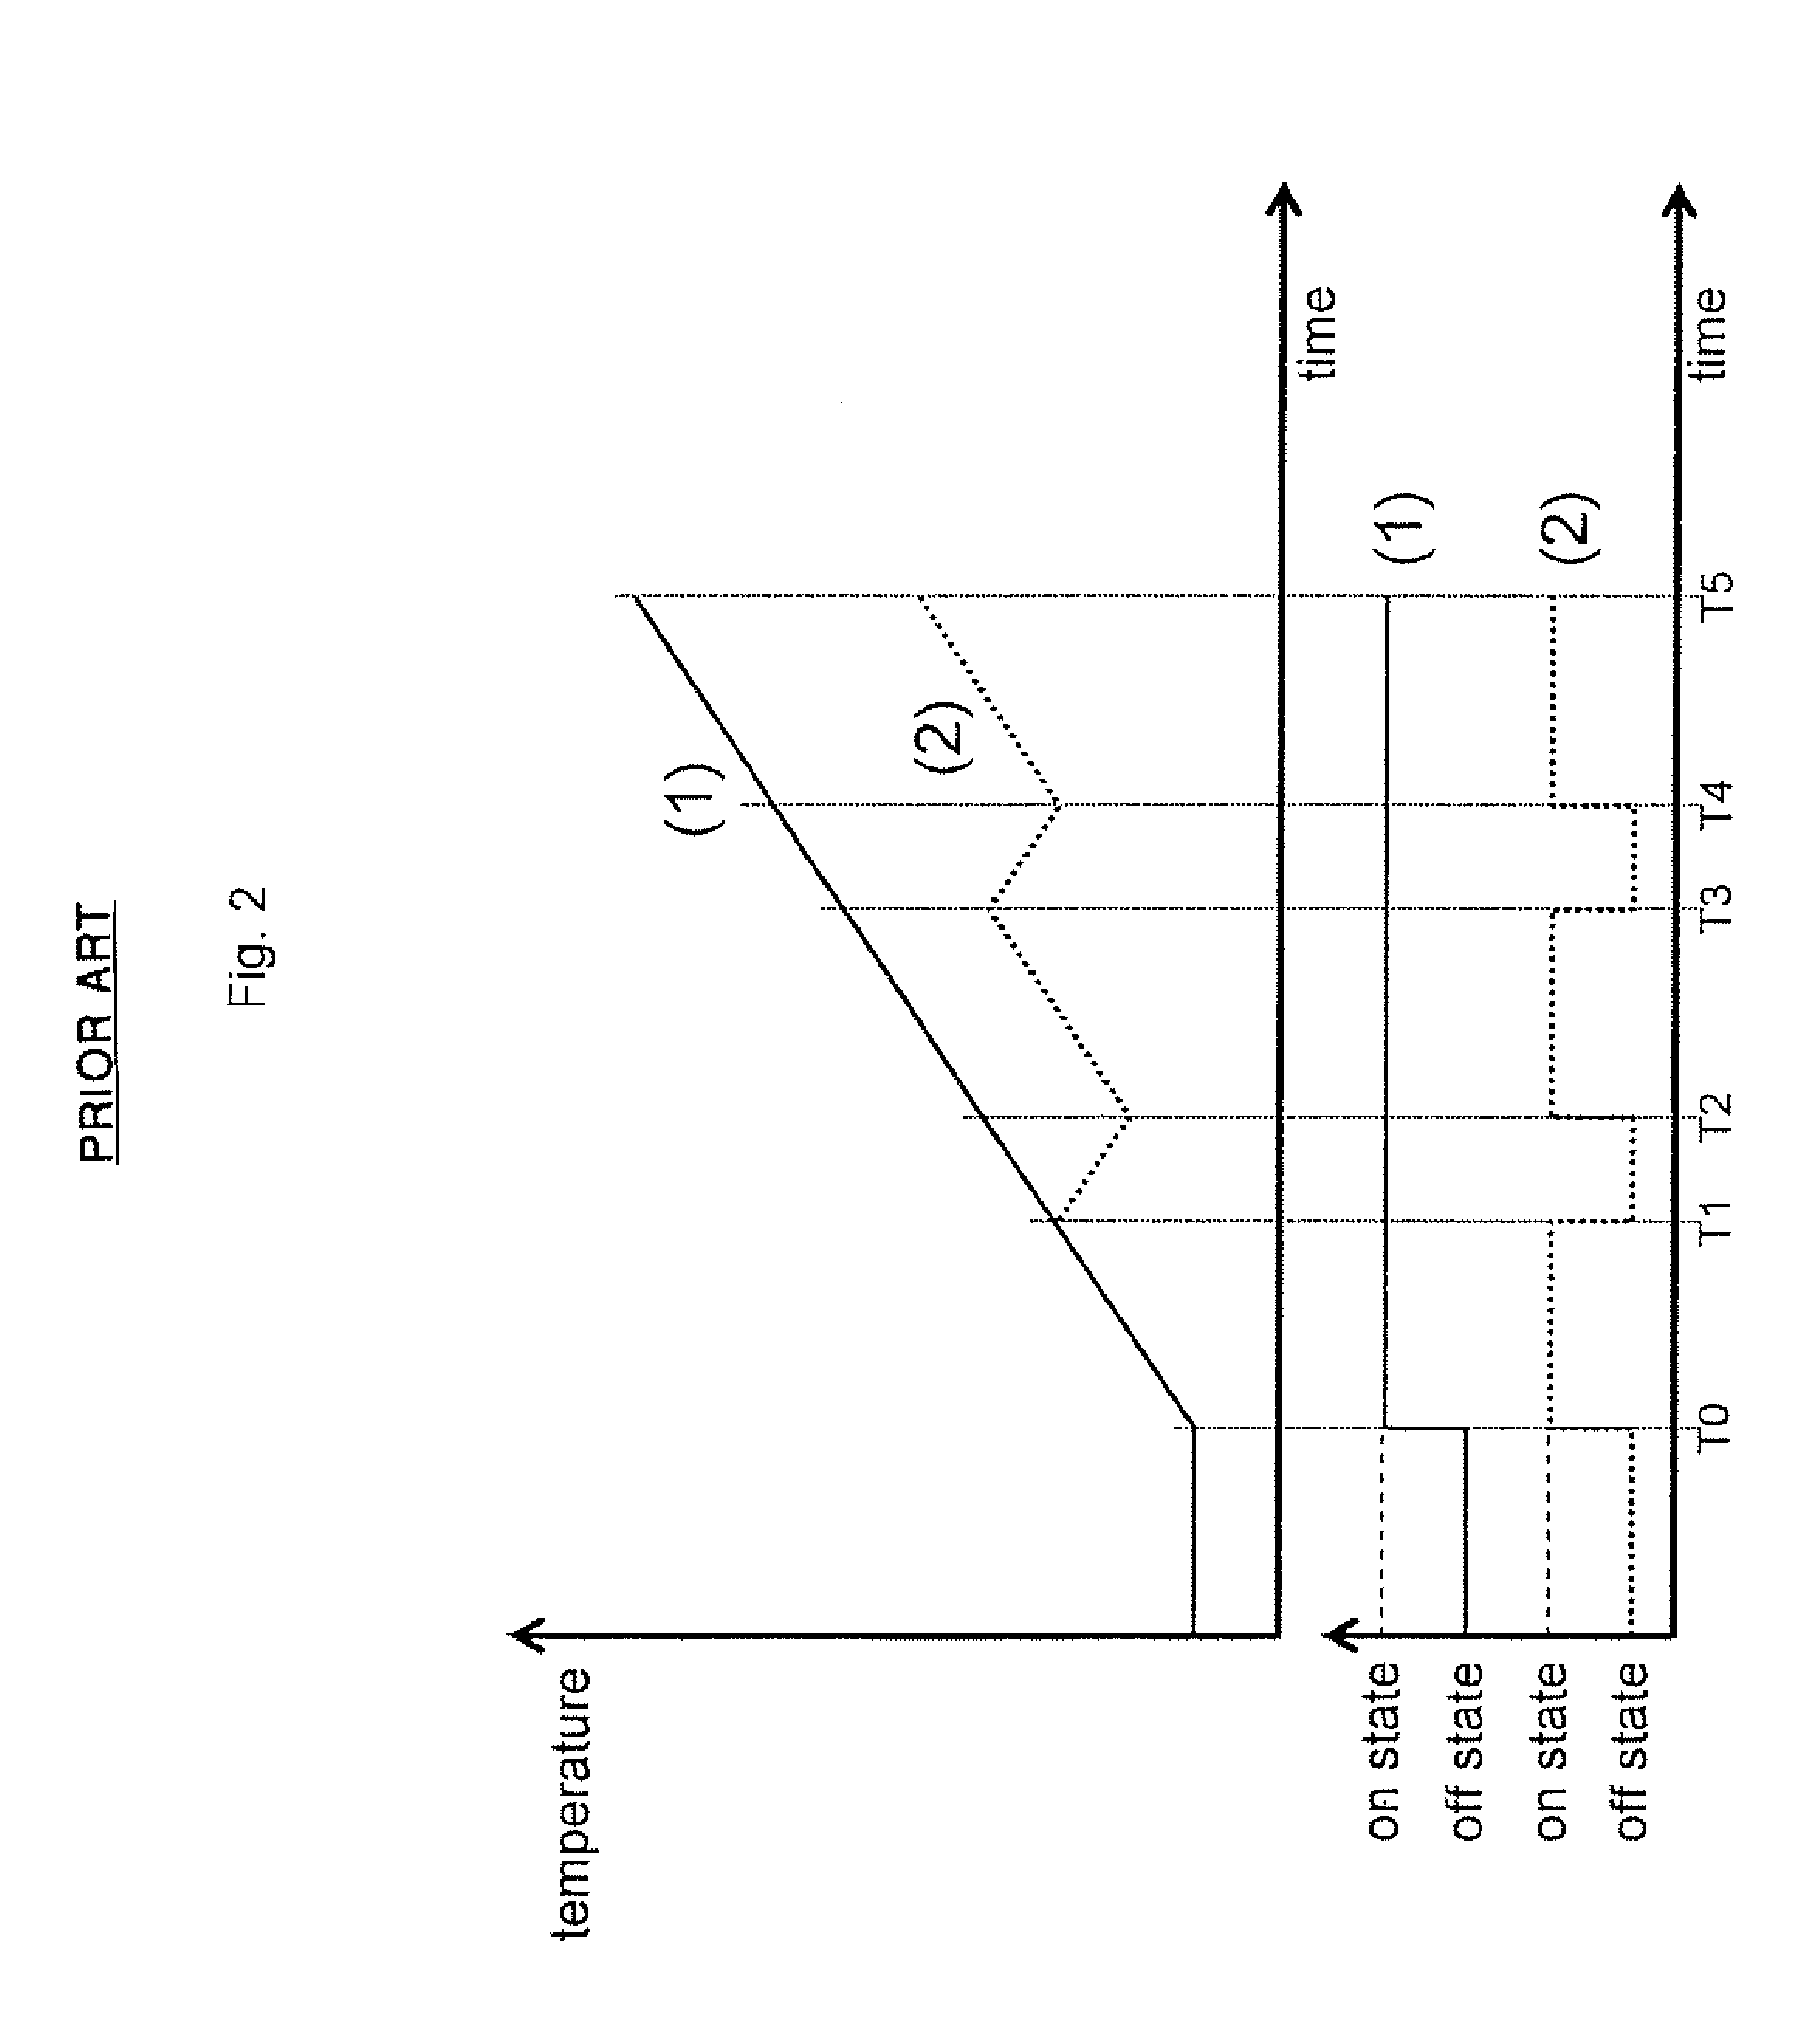 Lighting control apparatus with a plurality of lighting devices